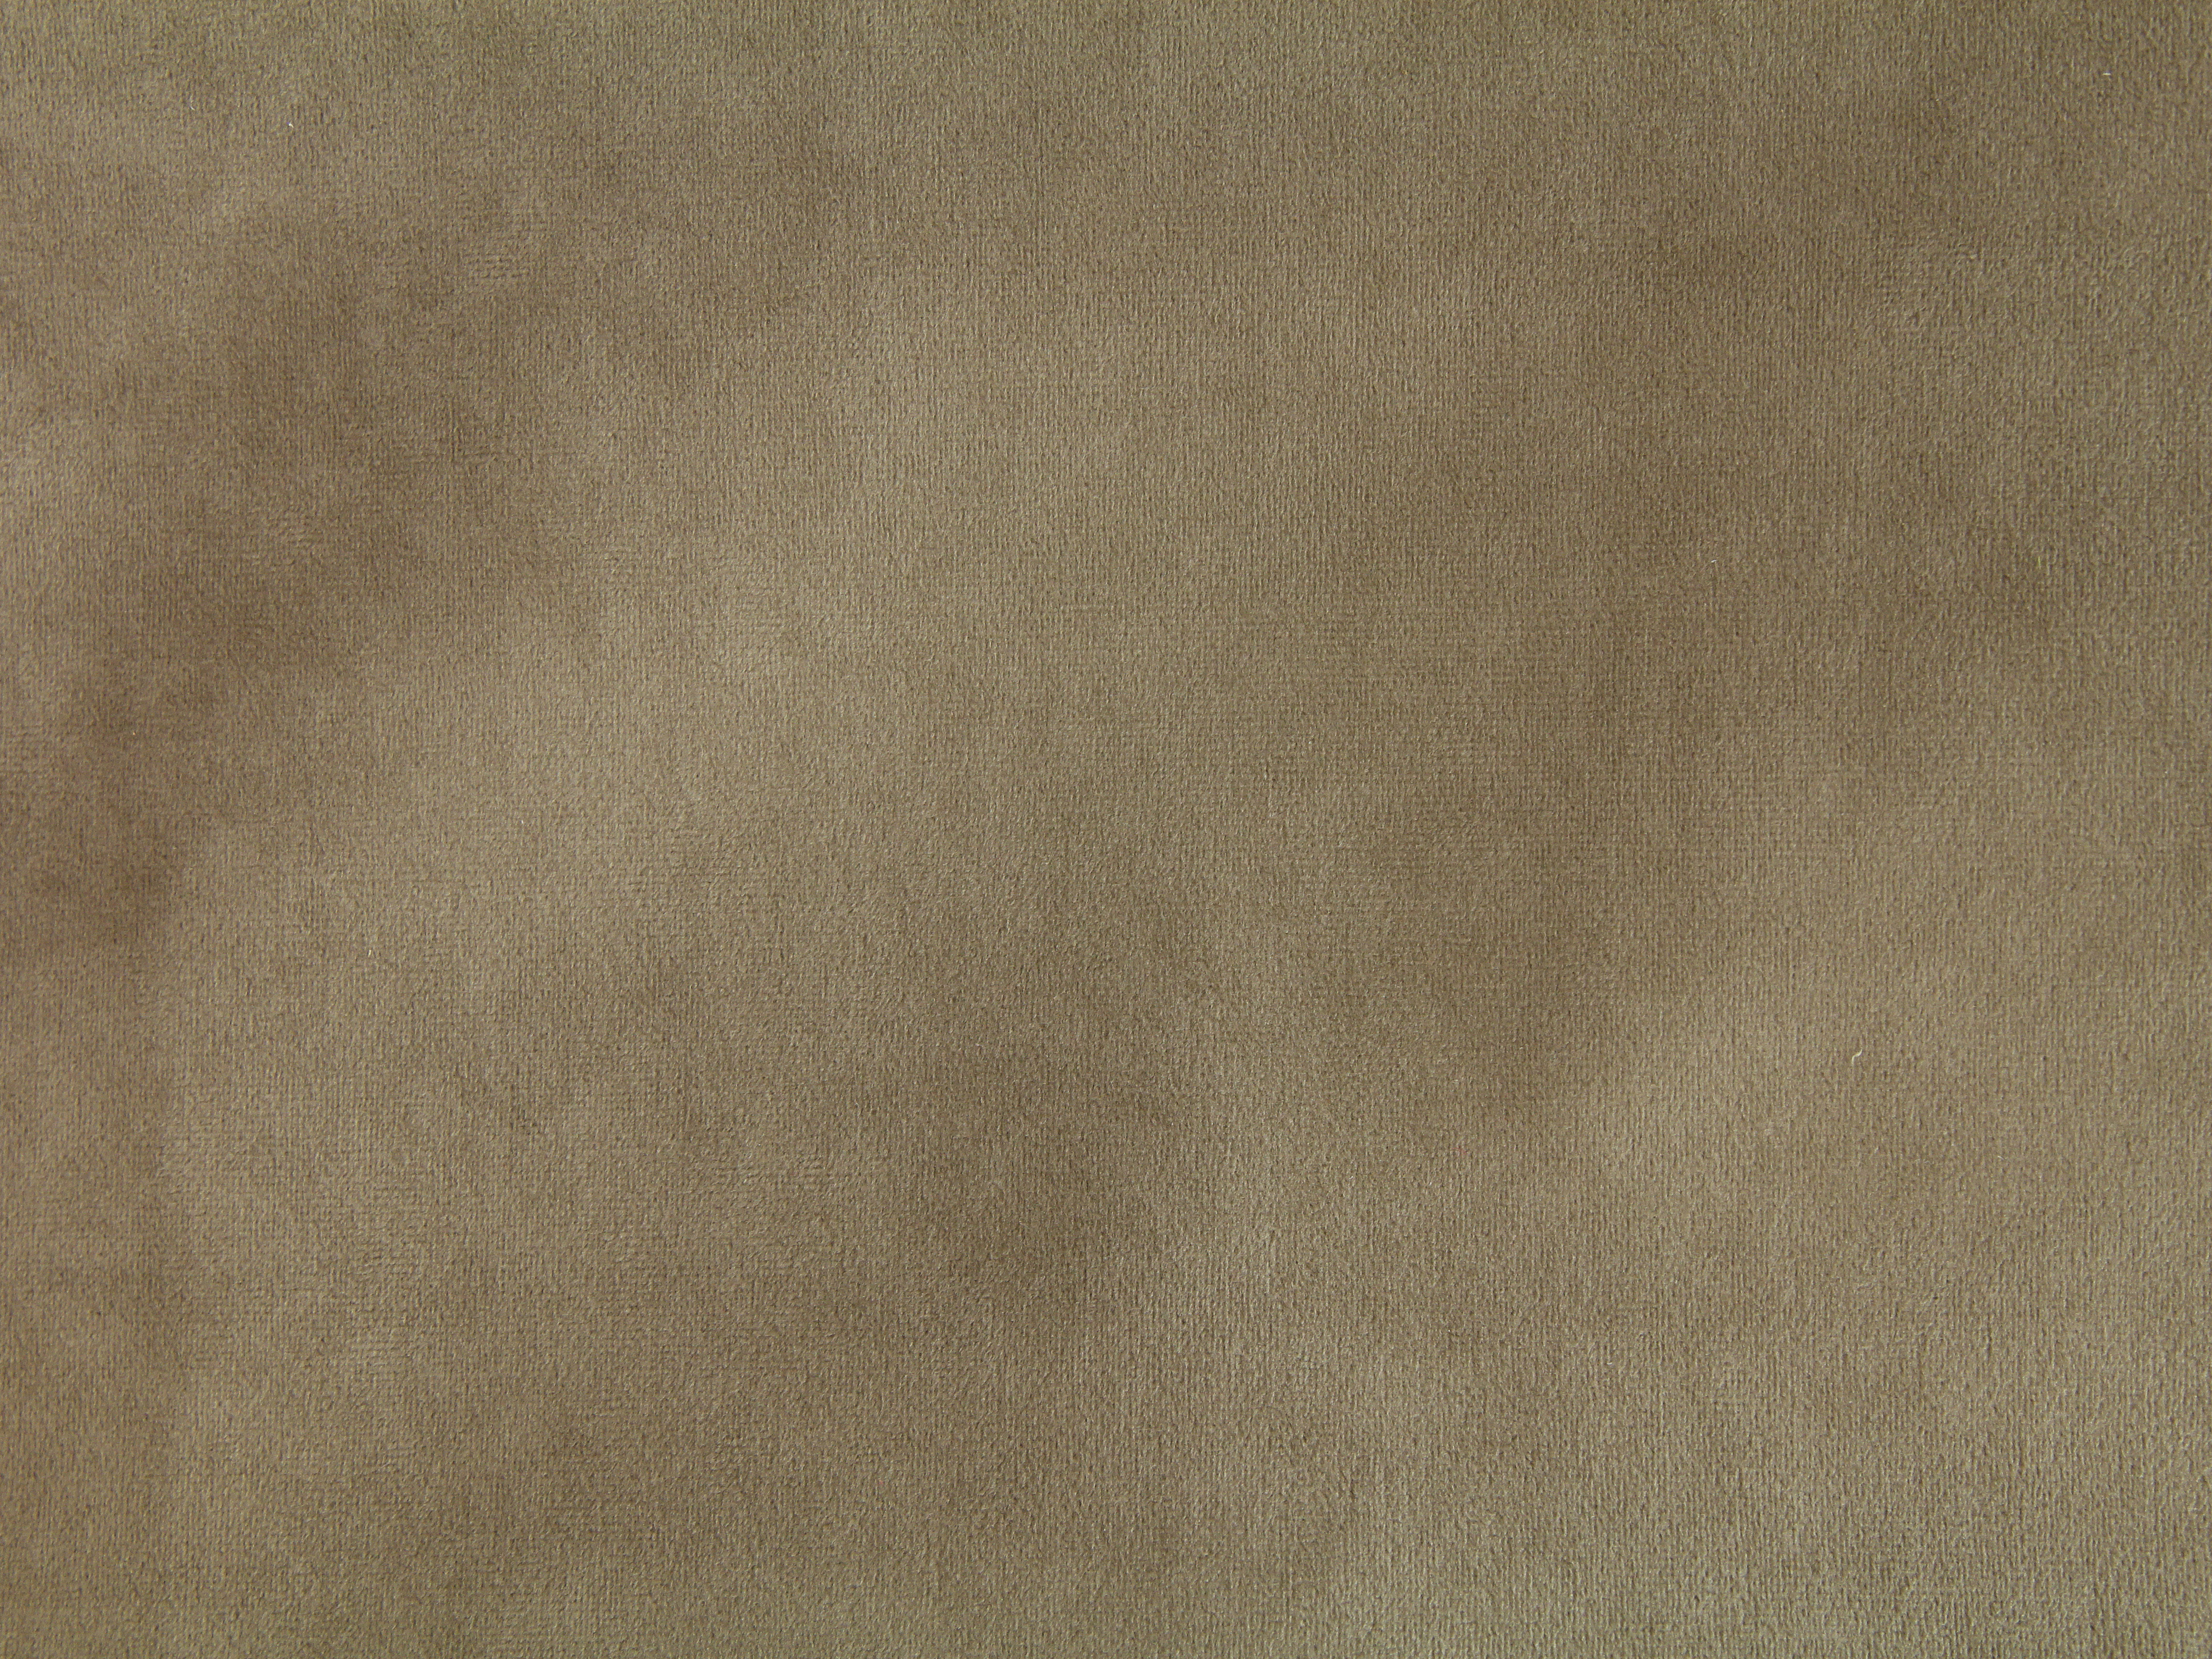 brown fabric fuzzy texture photo soft cloth stock image wallpaper - Texture  X